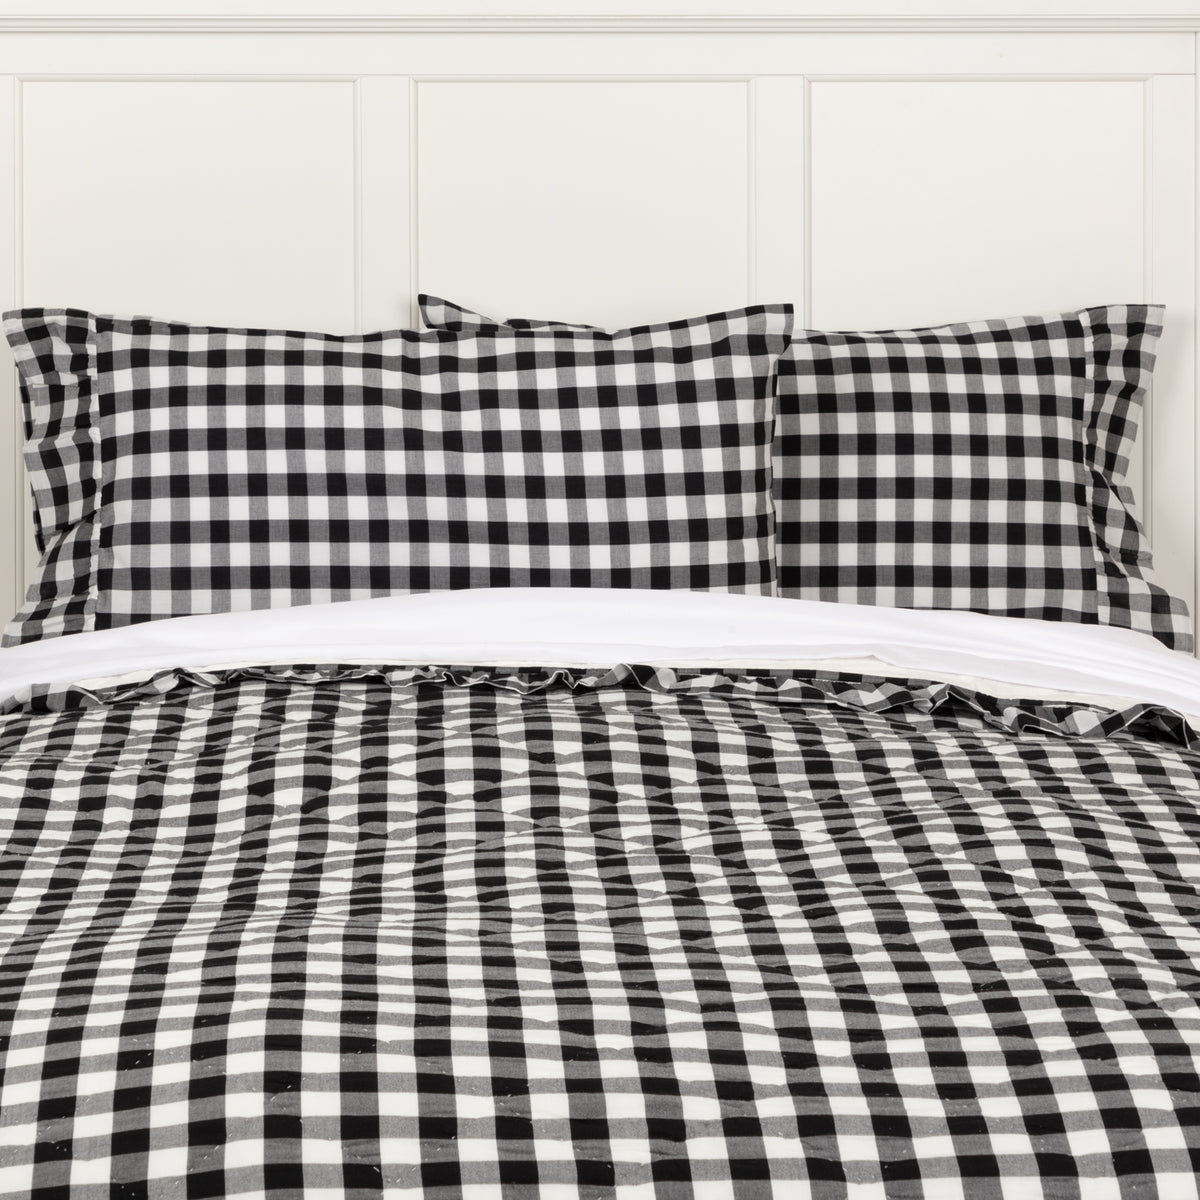 April & Olive Annie Buffalo Black Check Standard Pillow Case Set of 2 21x30+4 By VHC Brands